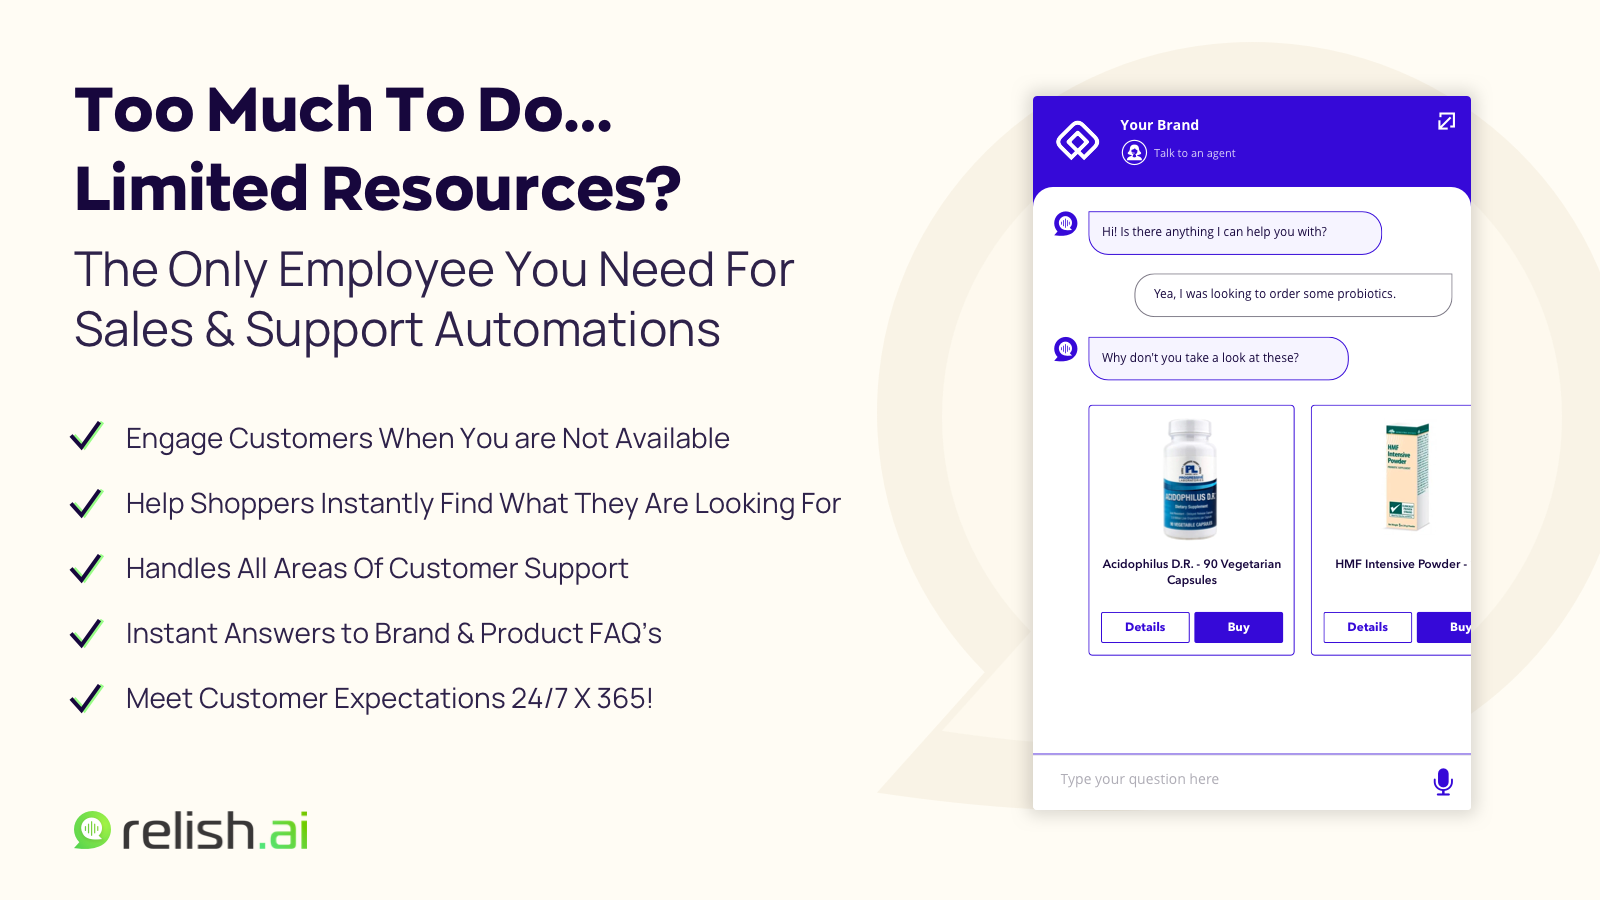 Provide Real-Time 24/7 Support and Minimize Your Workload - Automatically respond to FAQ’s, provide order status, returns, and much more. The only employee you need for sales & support automations.